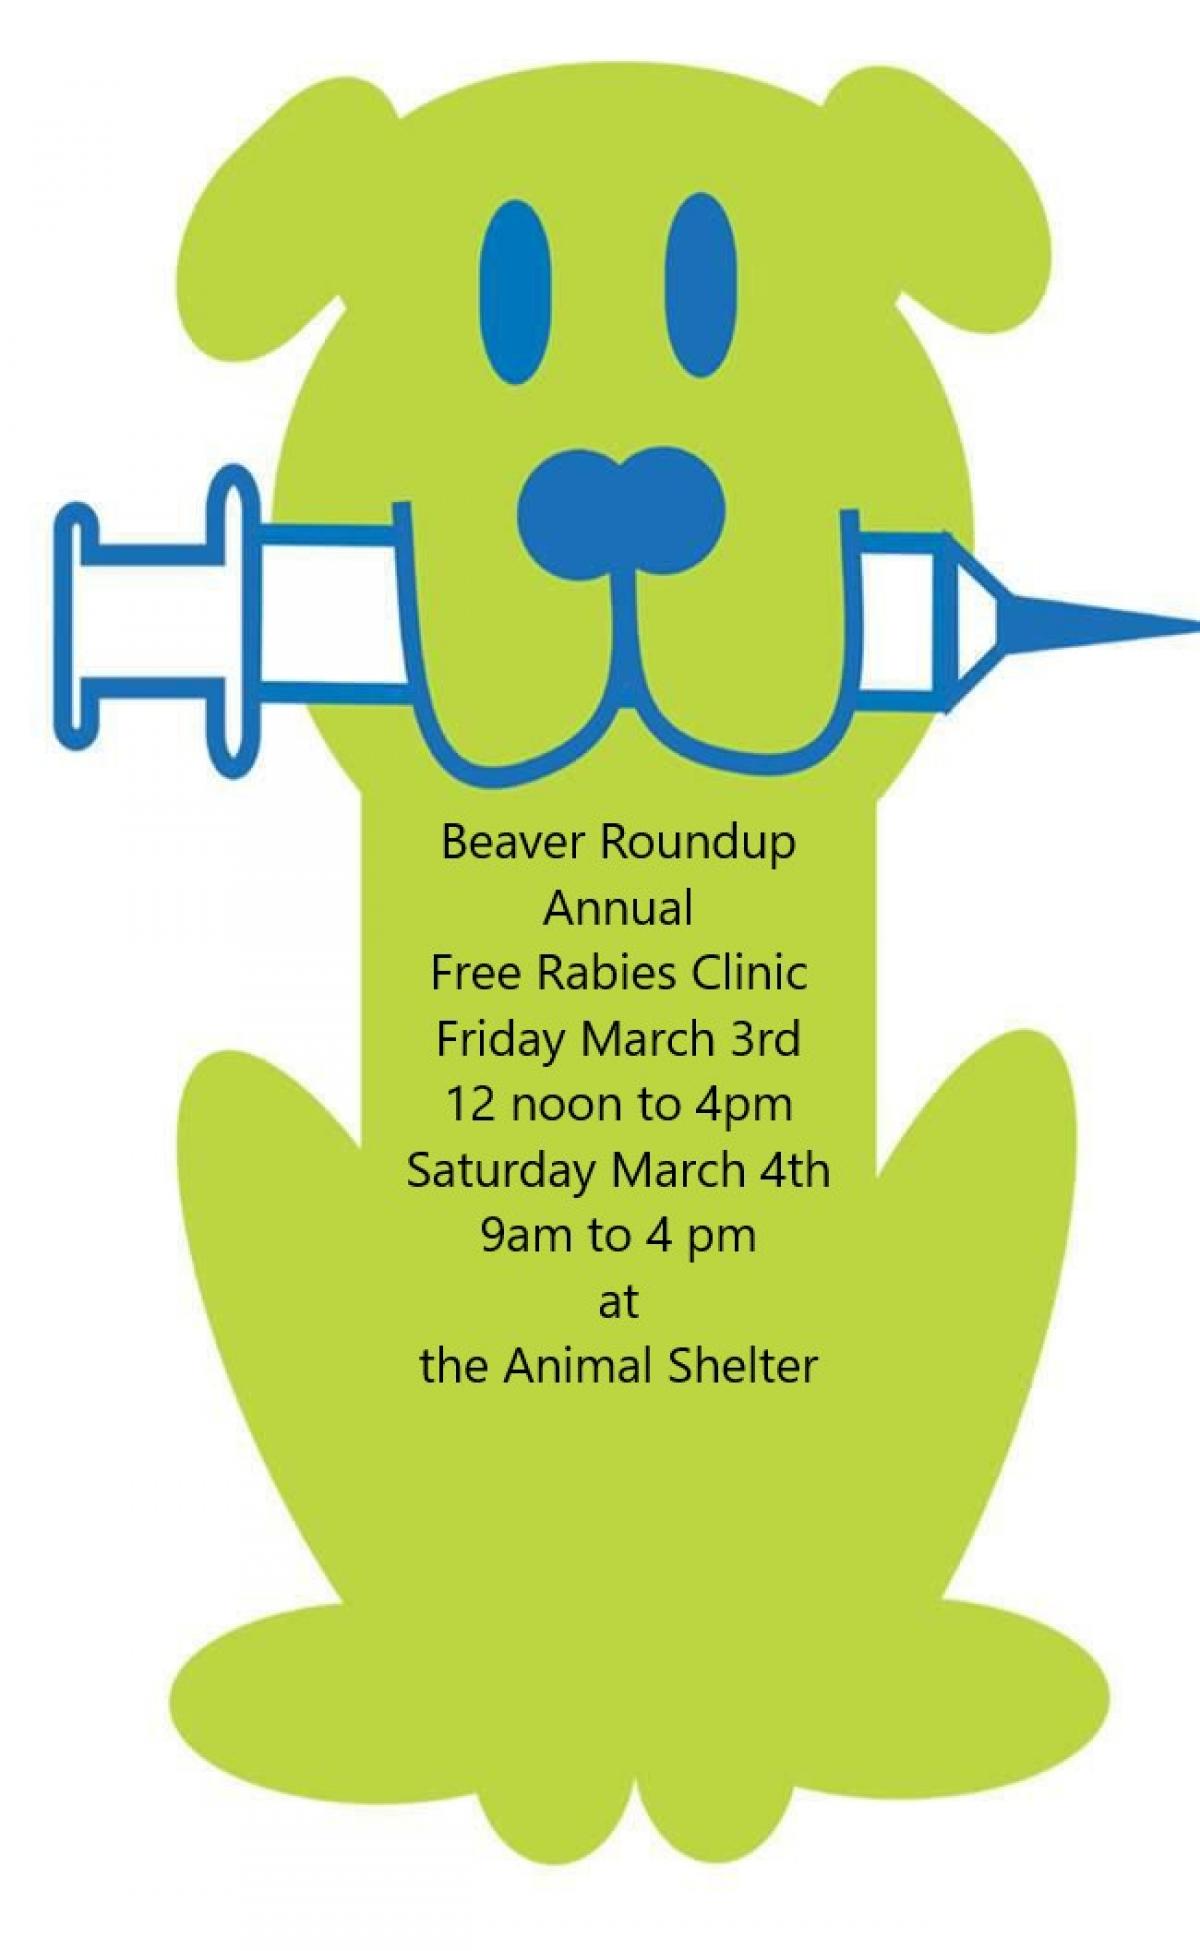 Annual Beaver Round-Up Free Rabies Clinic